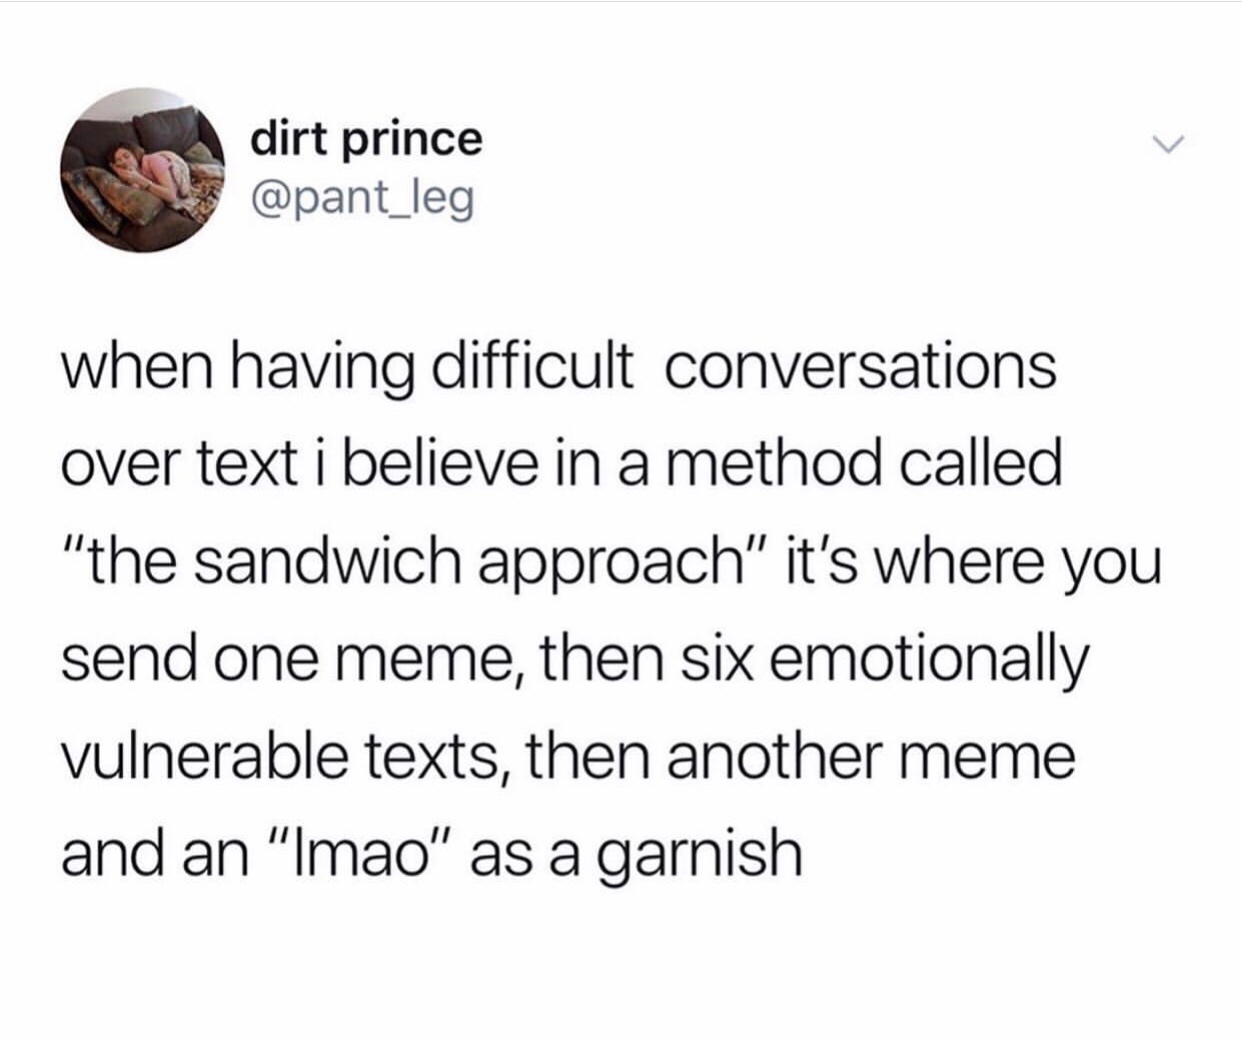 nothing more dangerous than a woman - dirt prince when having difficult conversations over text i believe in a method called "the sandwich approach" it's where you send one meme, then six emotionally vulnerable texts, then another meme and an "Imao" as a 